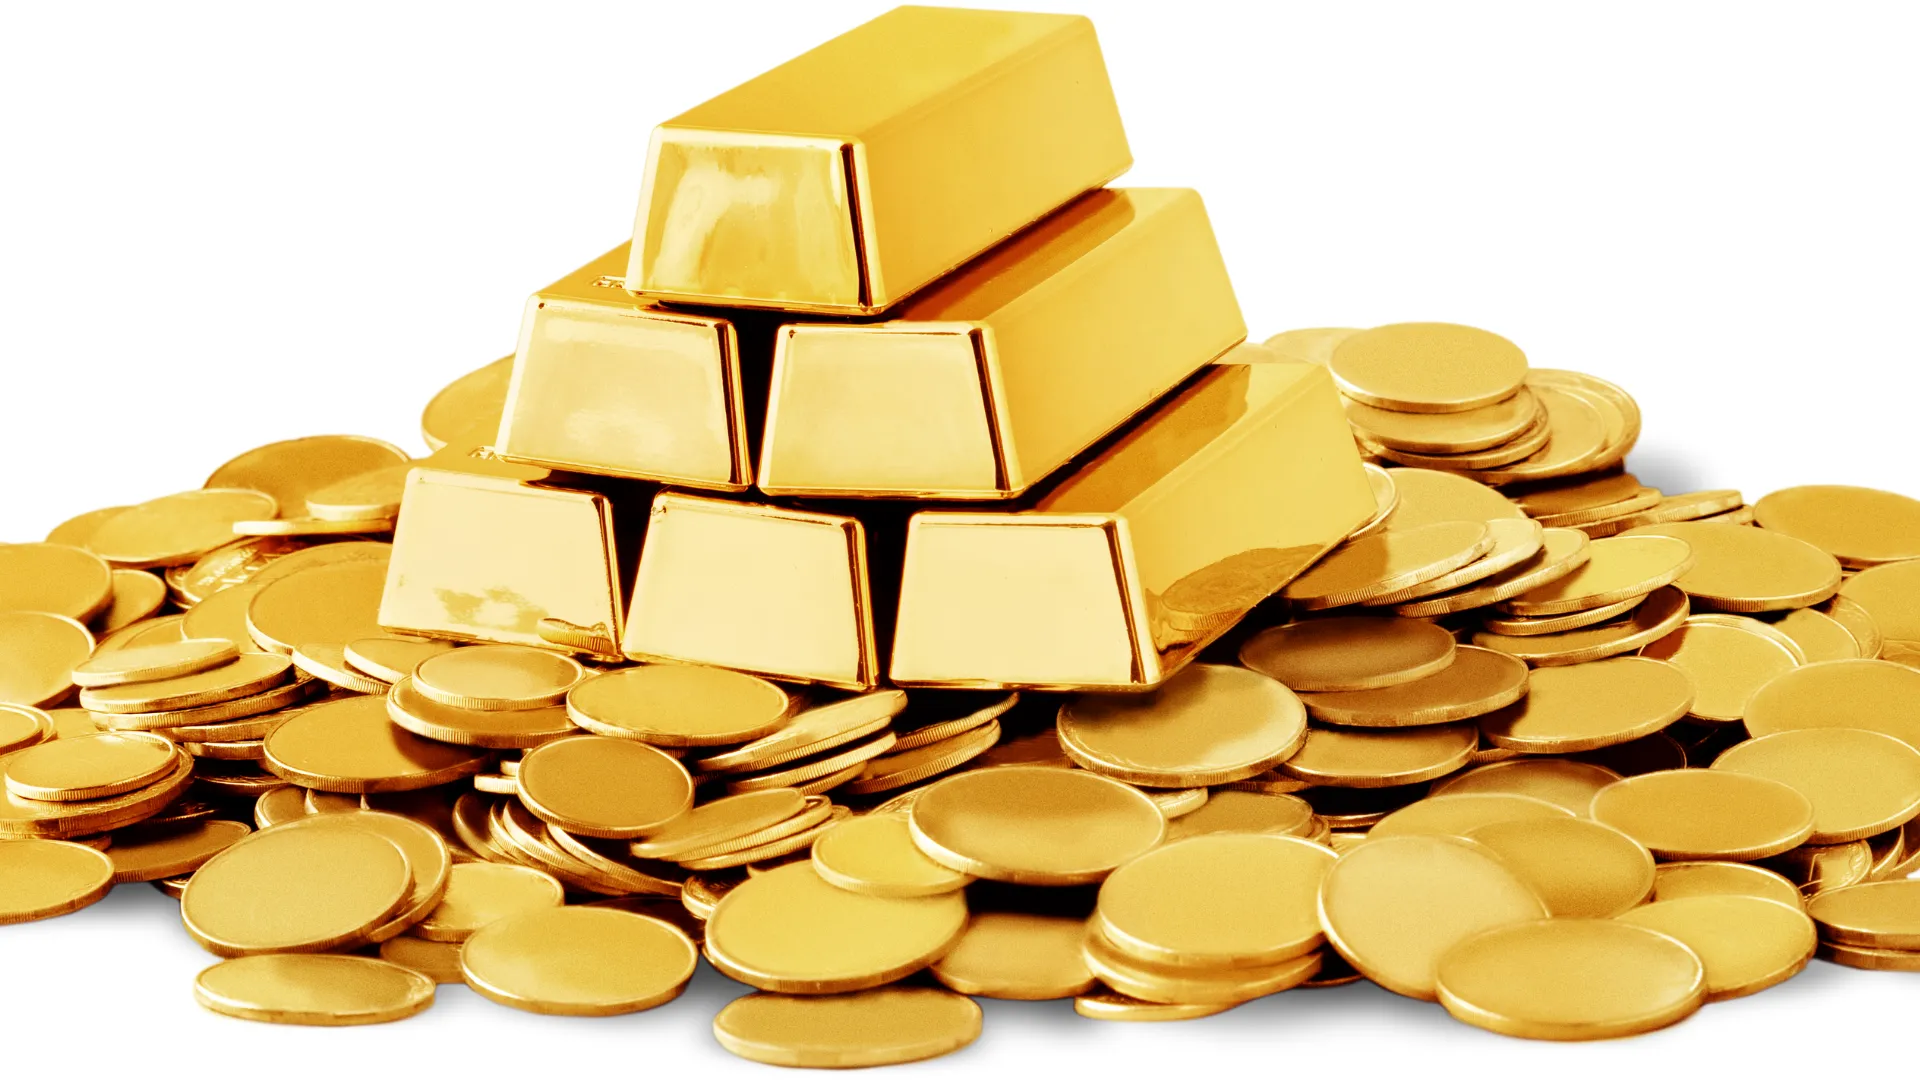 Many investors choose to buy gold as a way to diversify their portfolio and hedge against market volatility.